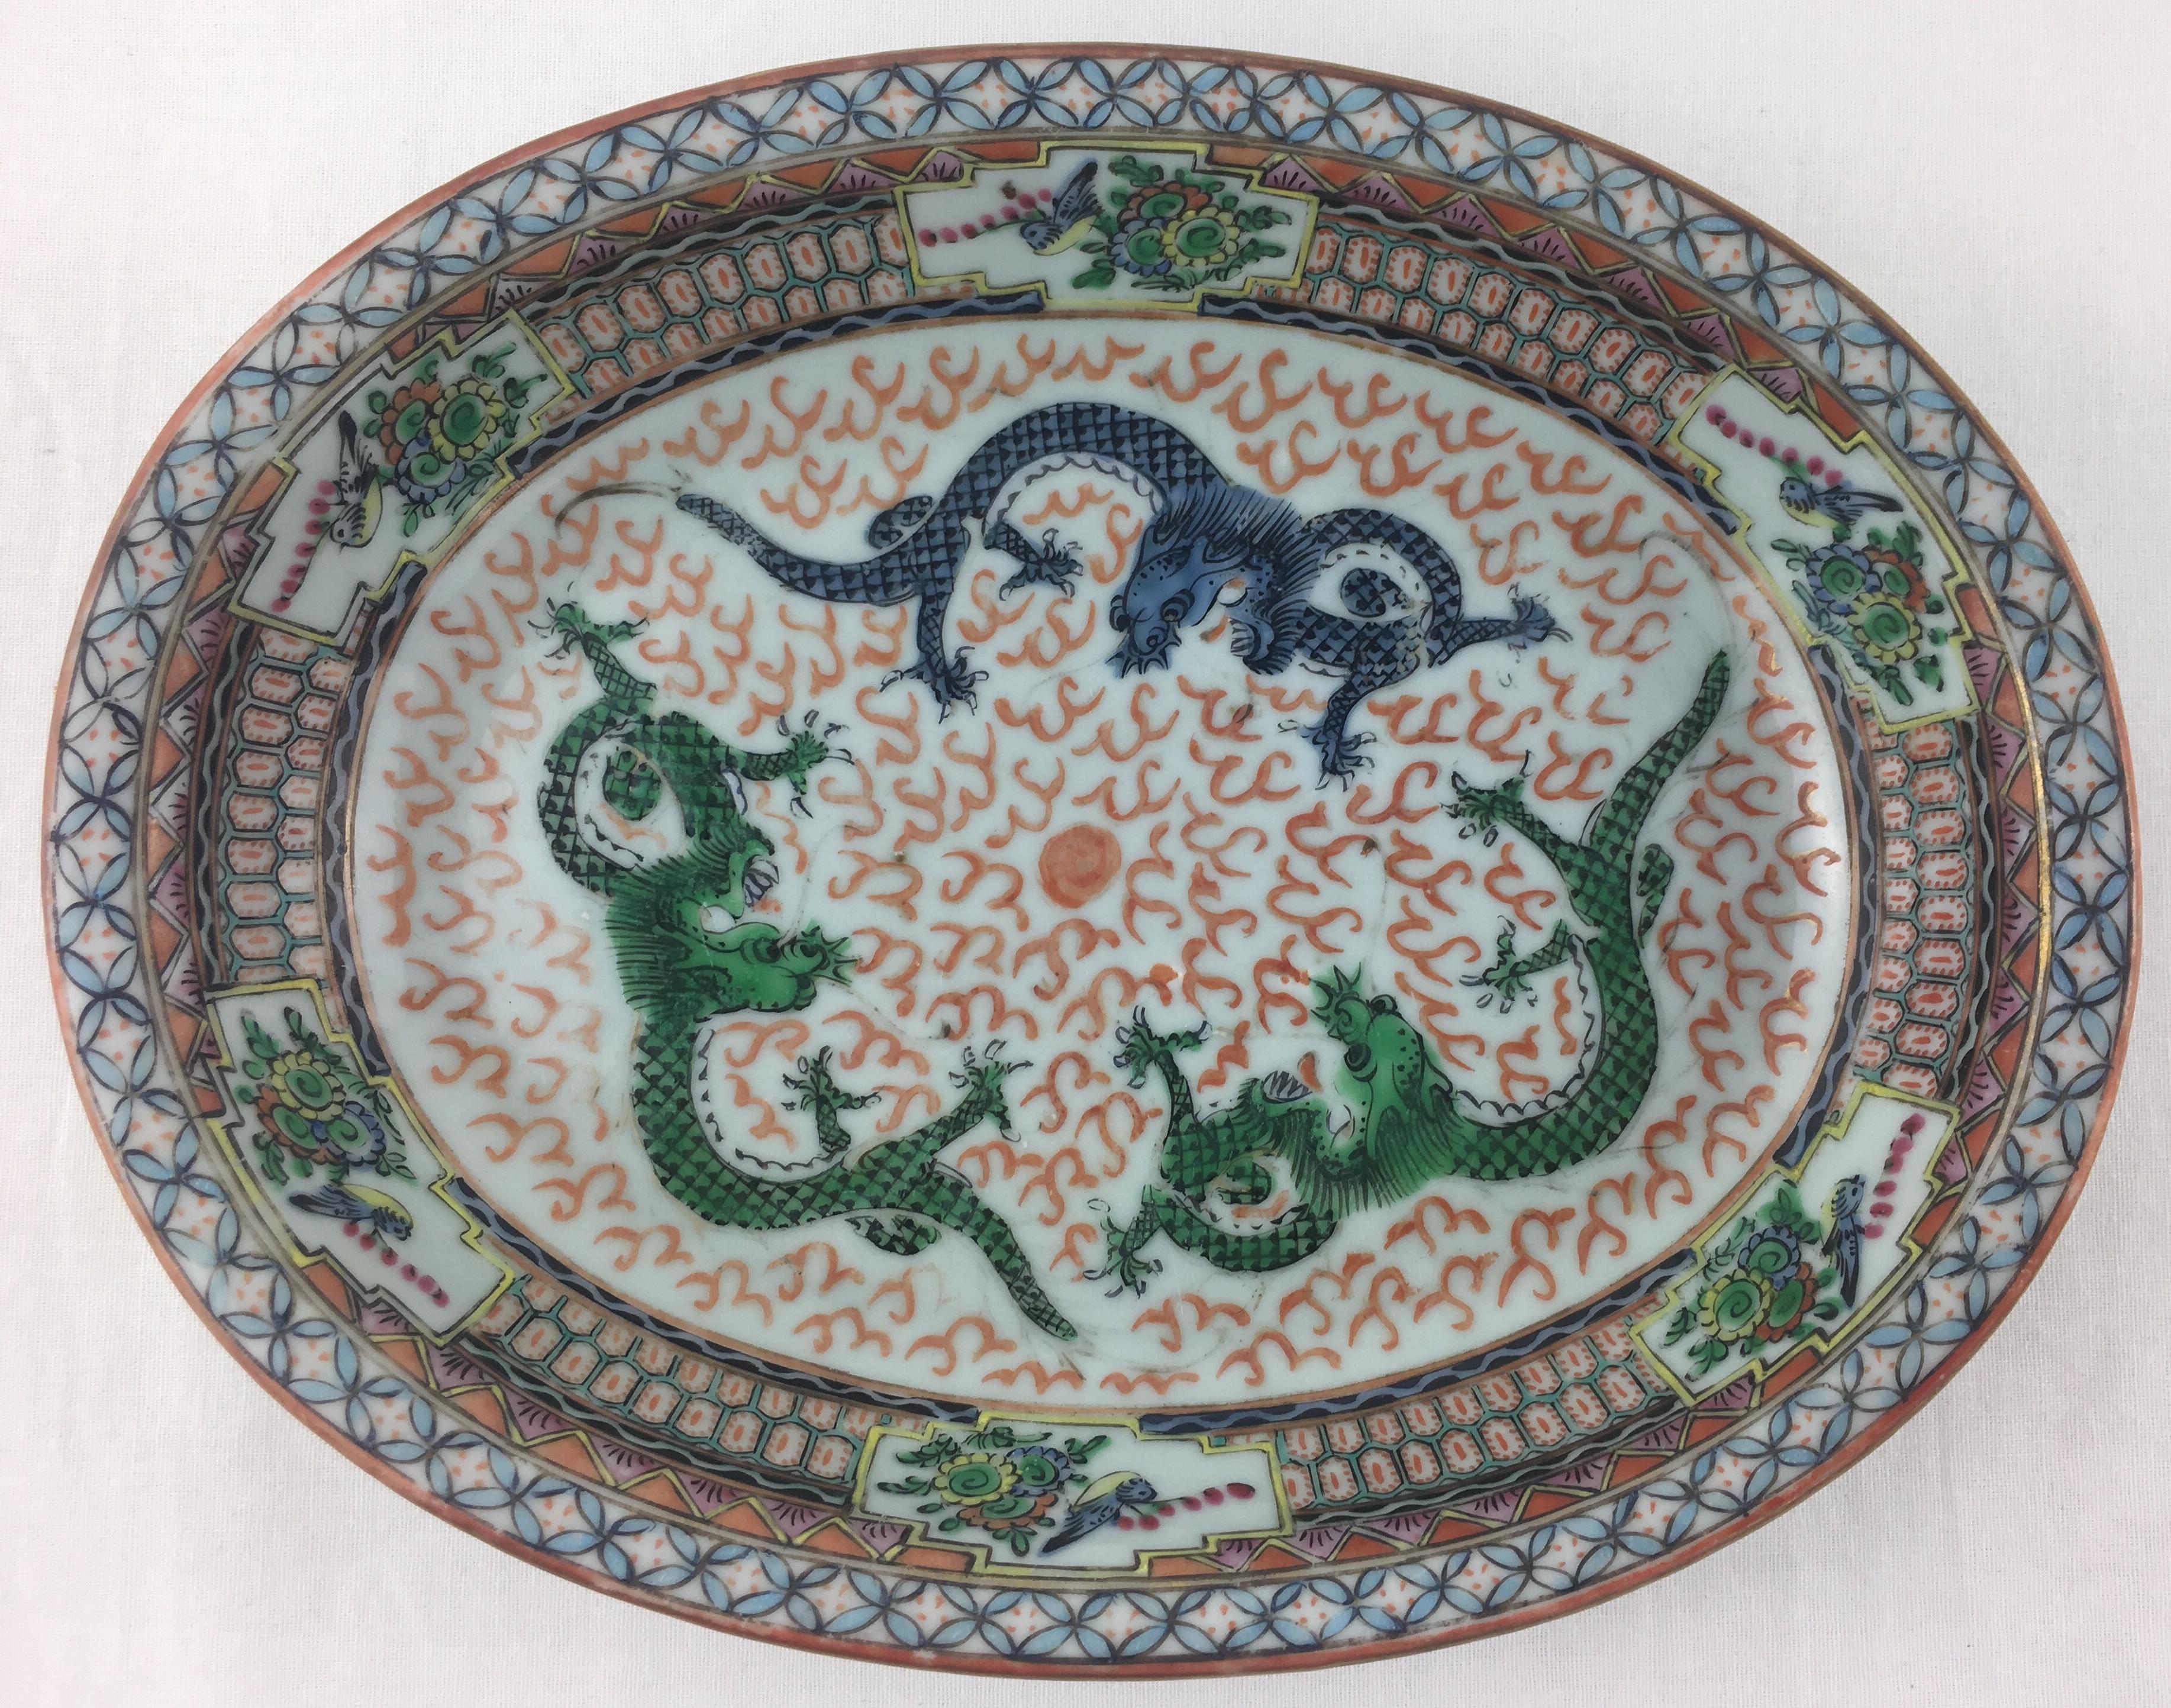 Hand-Painted Chinese Serving Bowl Adorned with Dragons